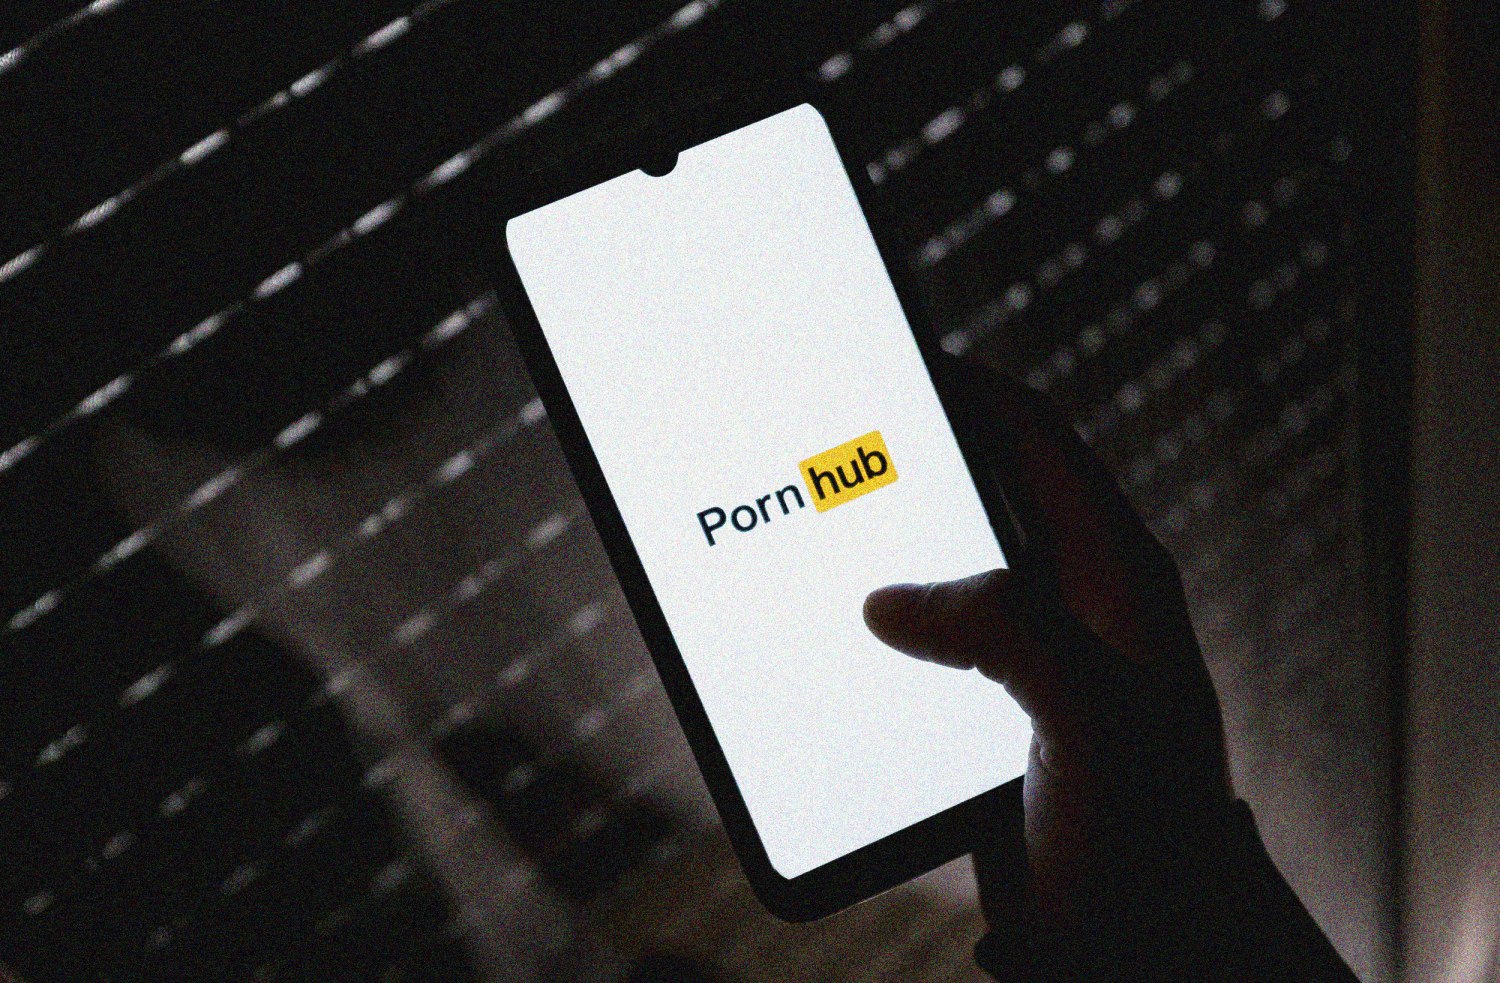 How to see deleted pornhub videos